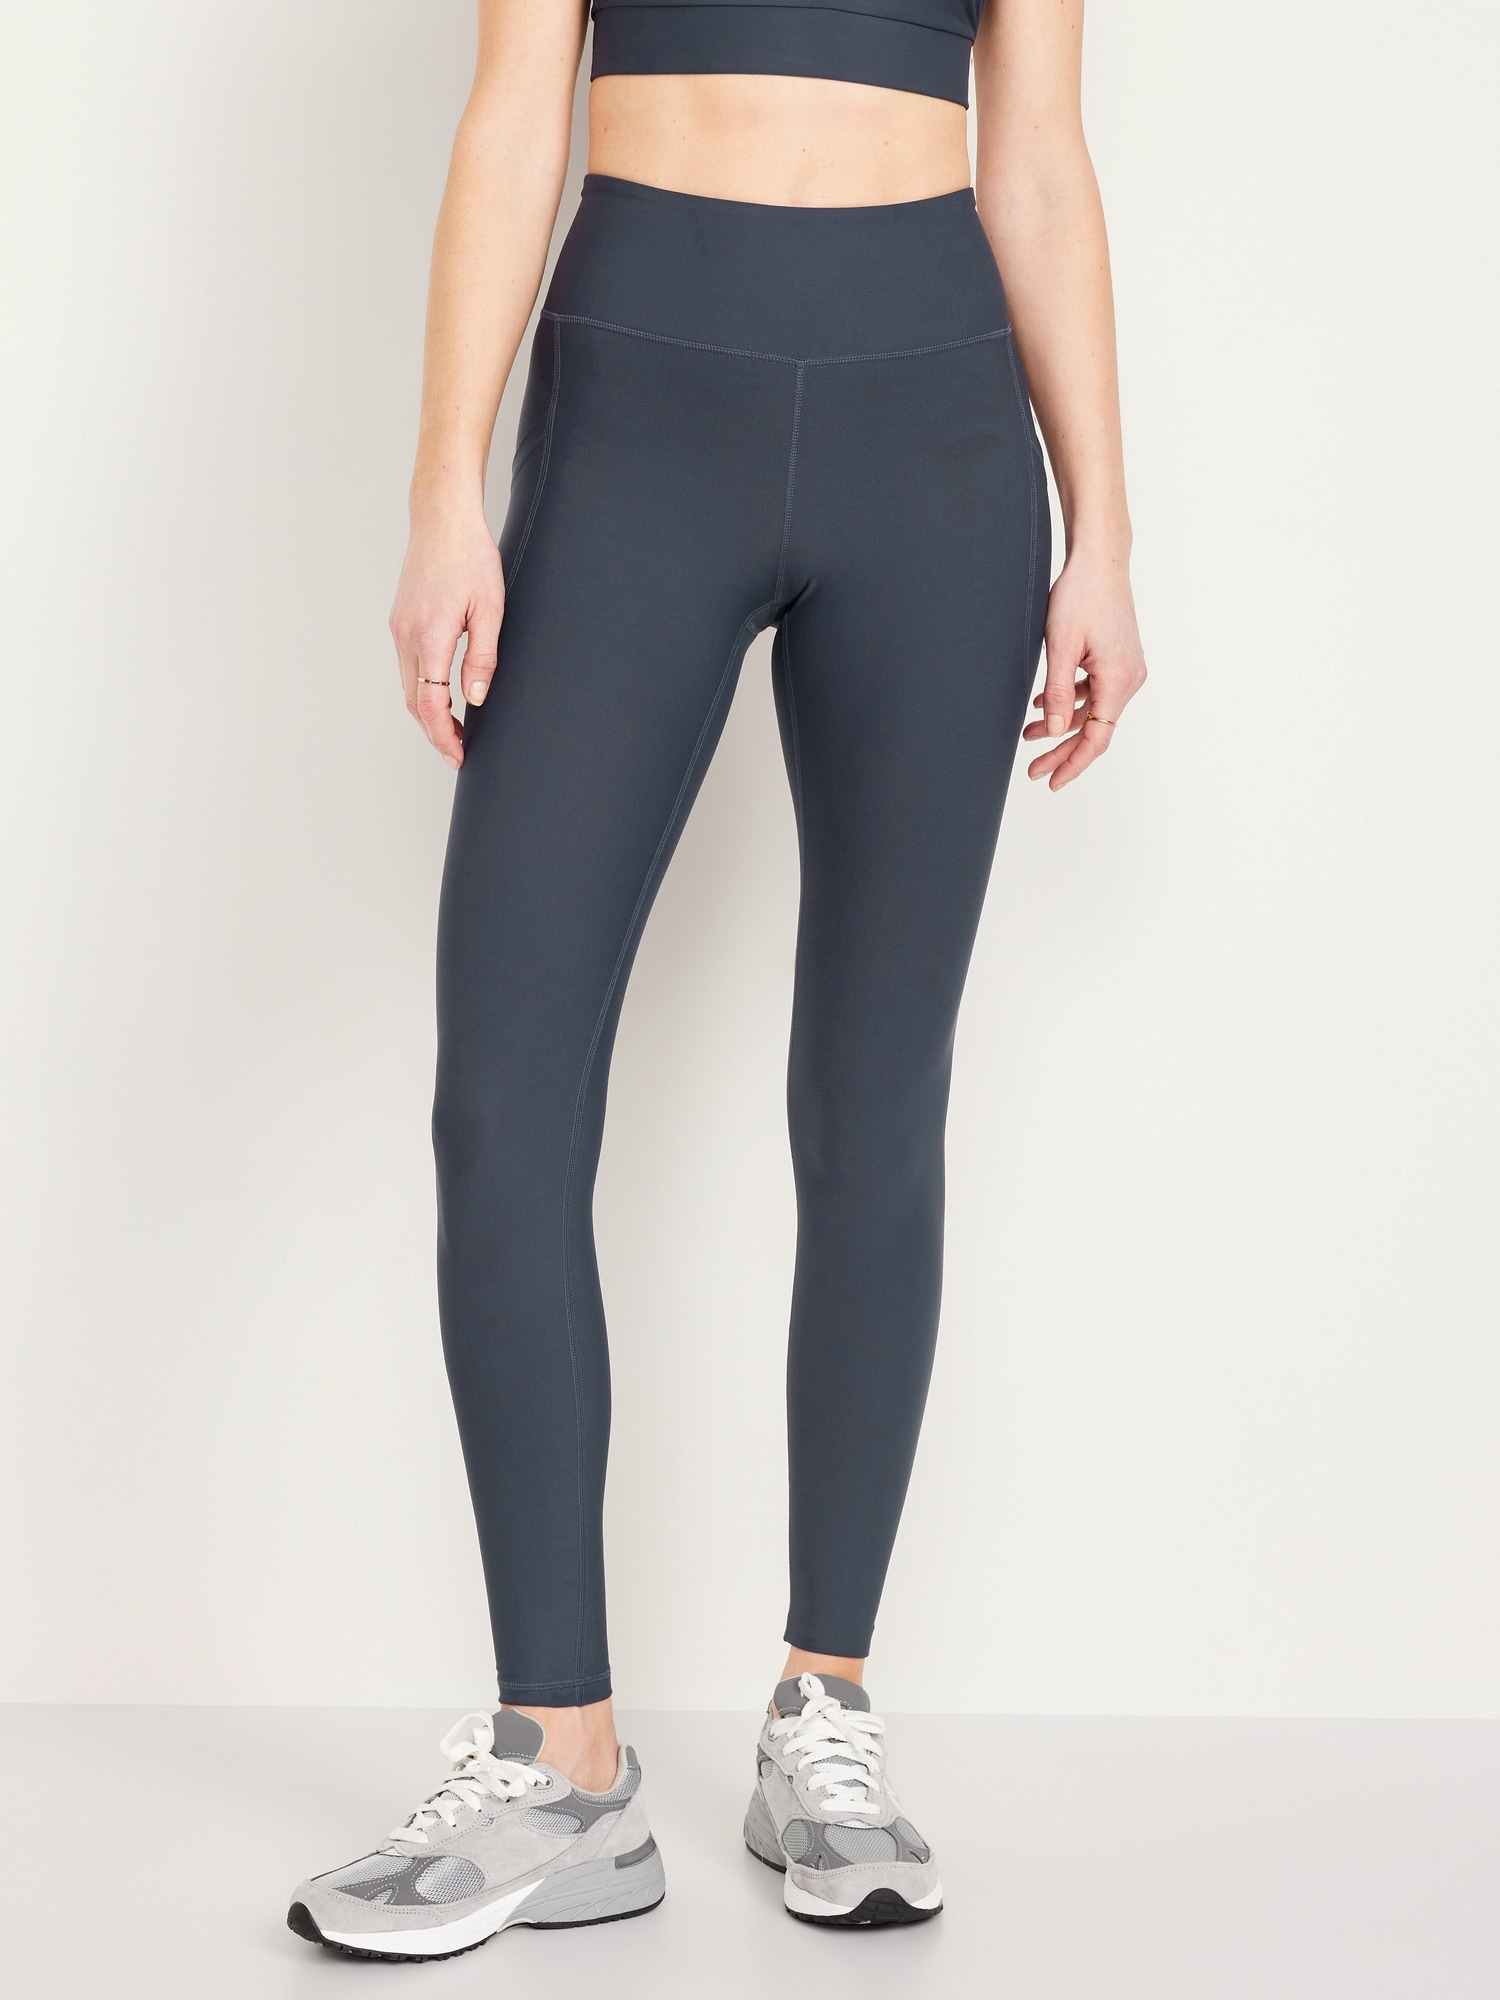 Old Navy High-Waisted Crossover Leggings